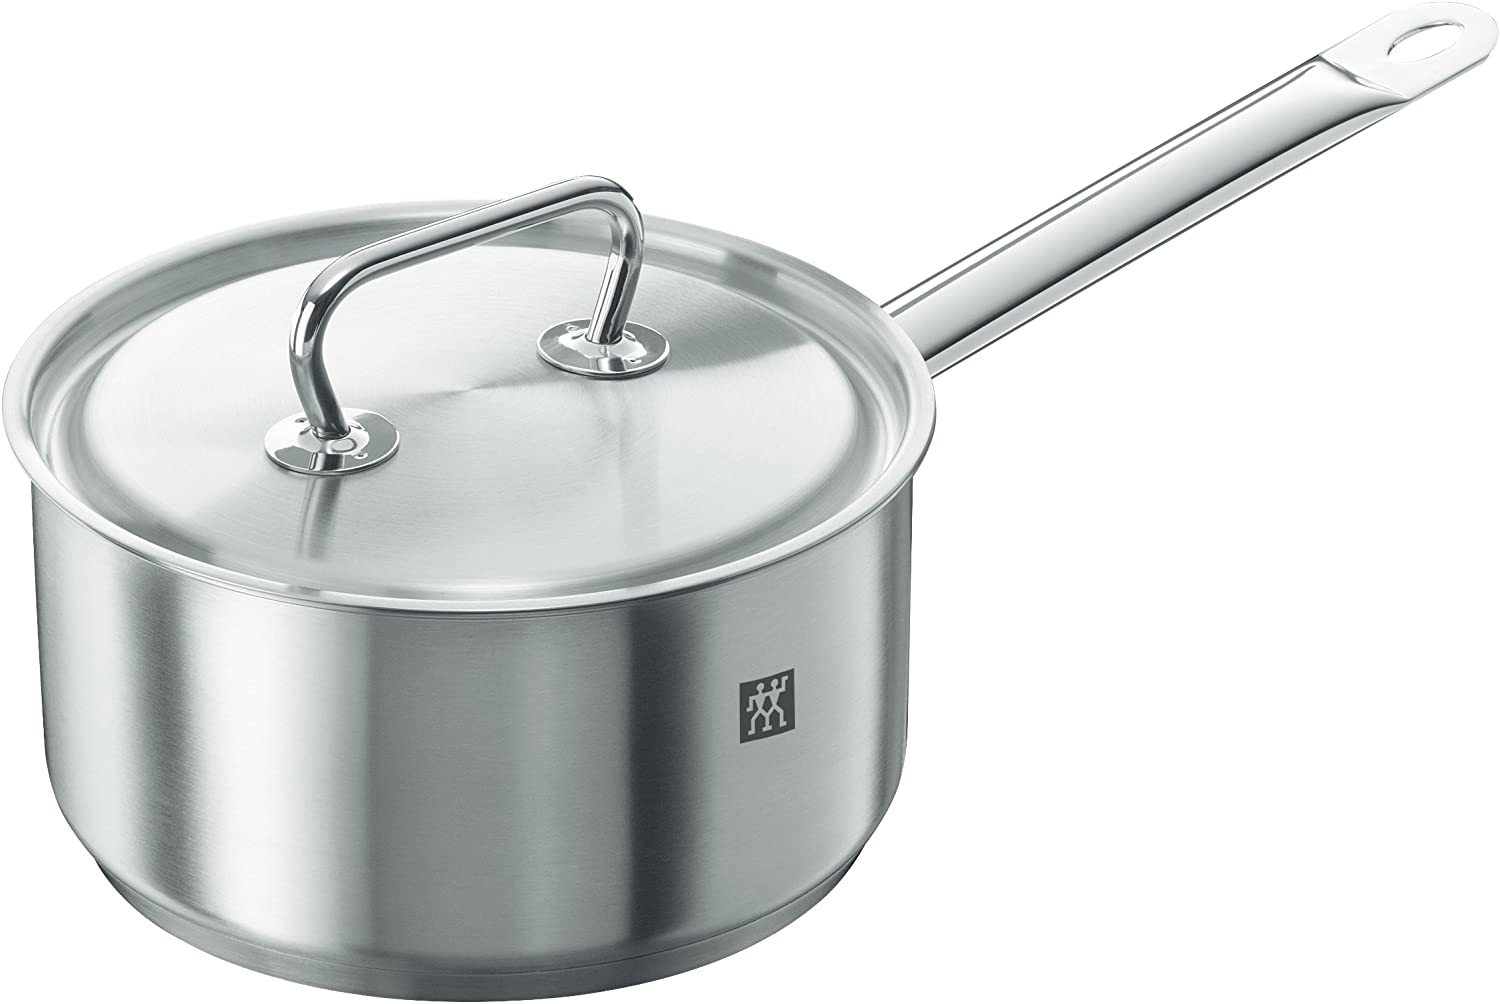 Zwilling Sigma Classic Material 40915-200-0 Saucepan 3.0 L Suitable for Induction Cookers 20 cm Stainless Steel